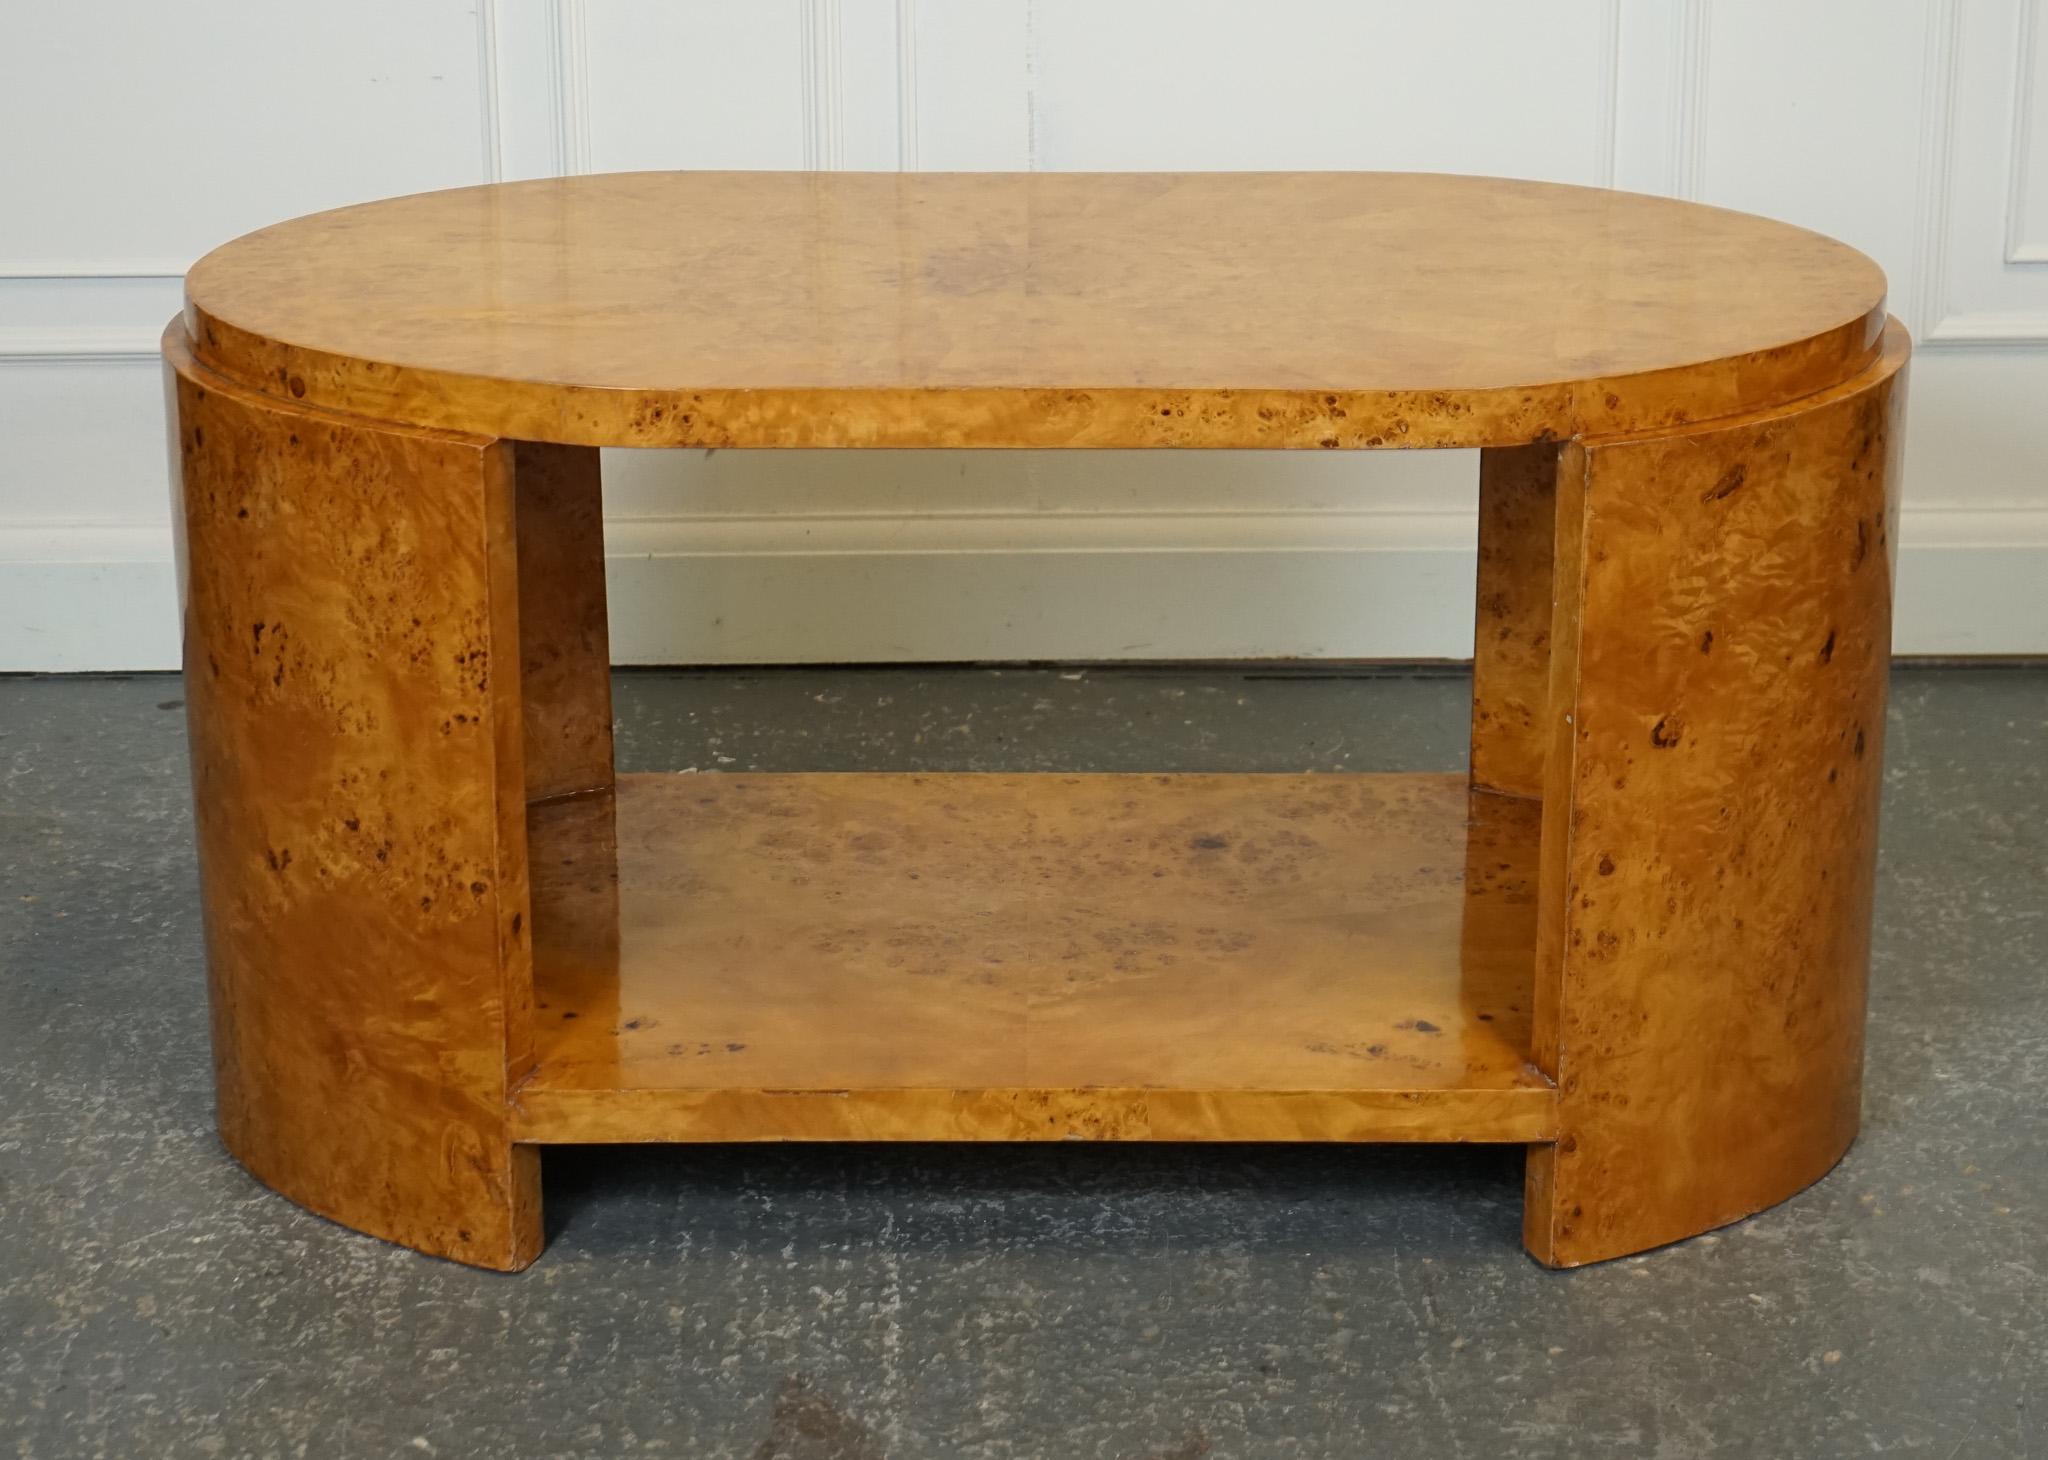 
Antiques of London



We are delighted to offer for sale this Lovely Art Deco Style Oval Burr Walnut Coffee Table.

A lovely Art Deco style oval burr walnut coffee table is an exquisite piece of furniture that exudes elegance and sophistication. It